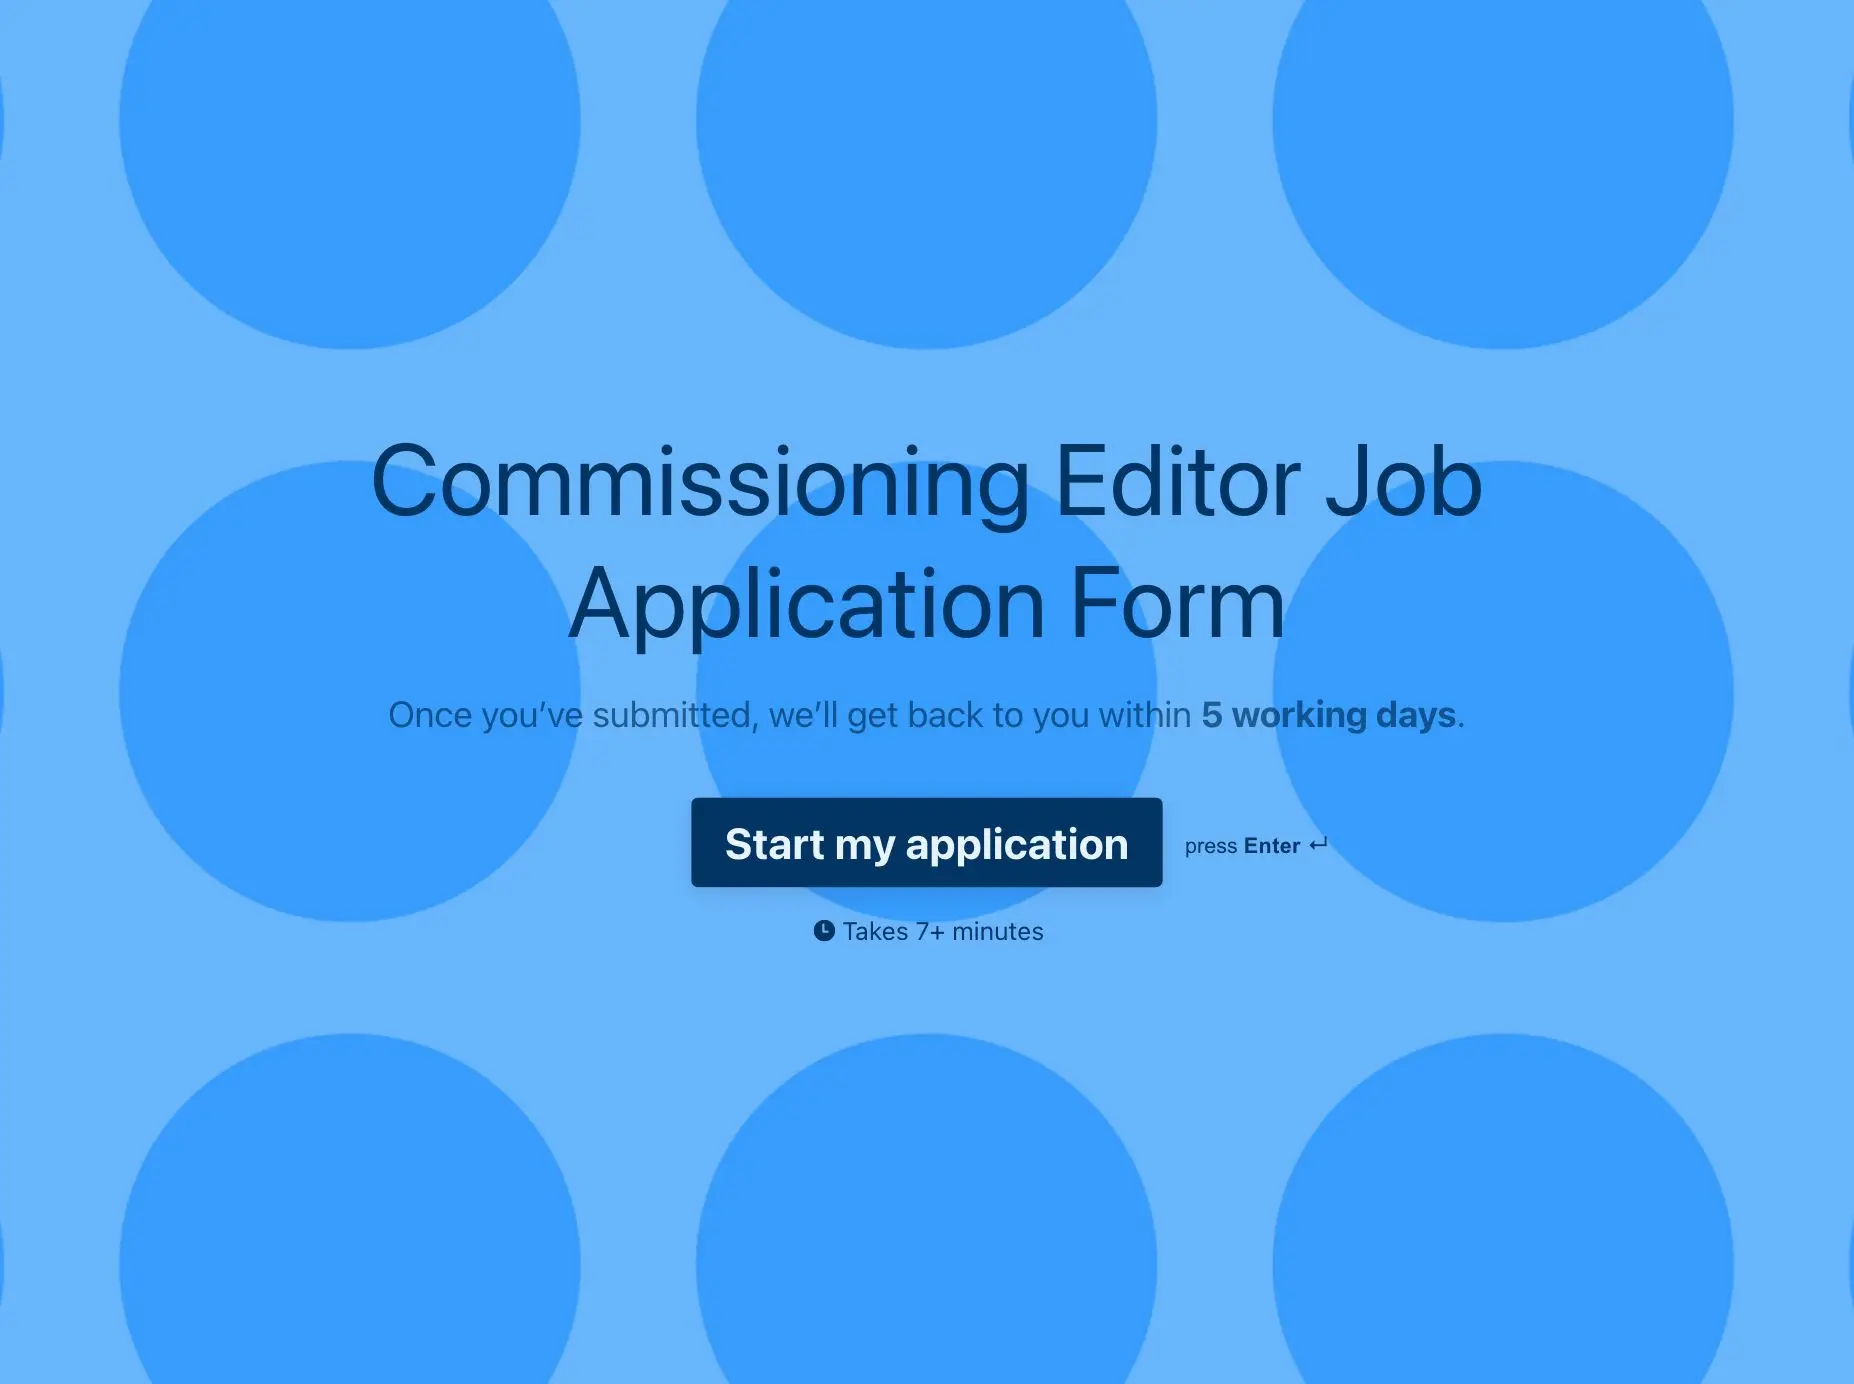 Commissioning Editor Job Application Form Template Hero